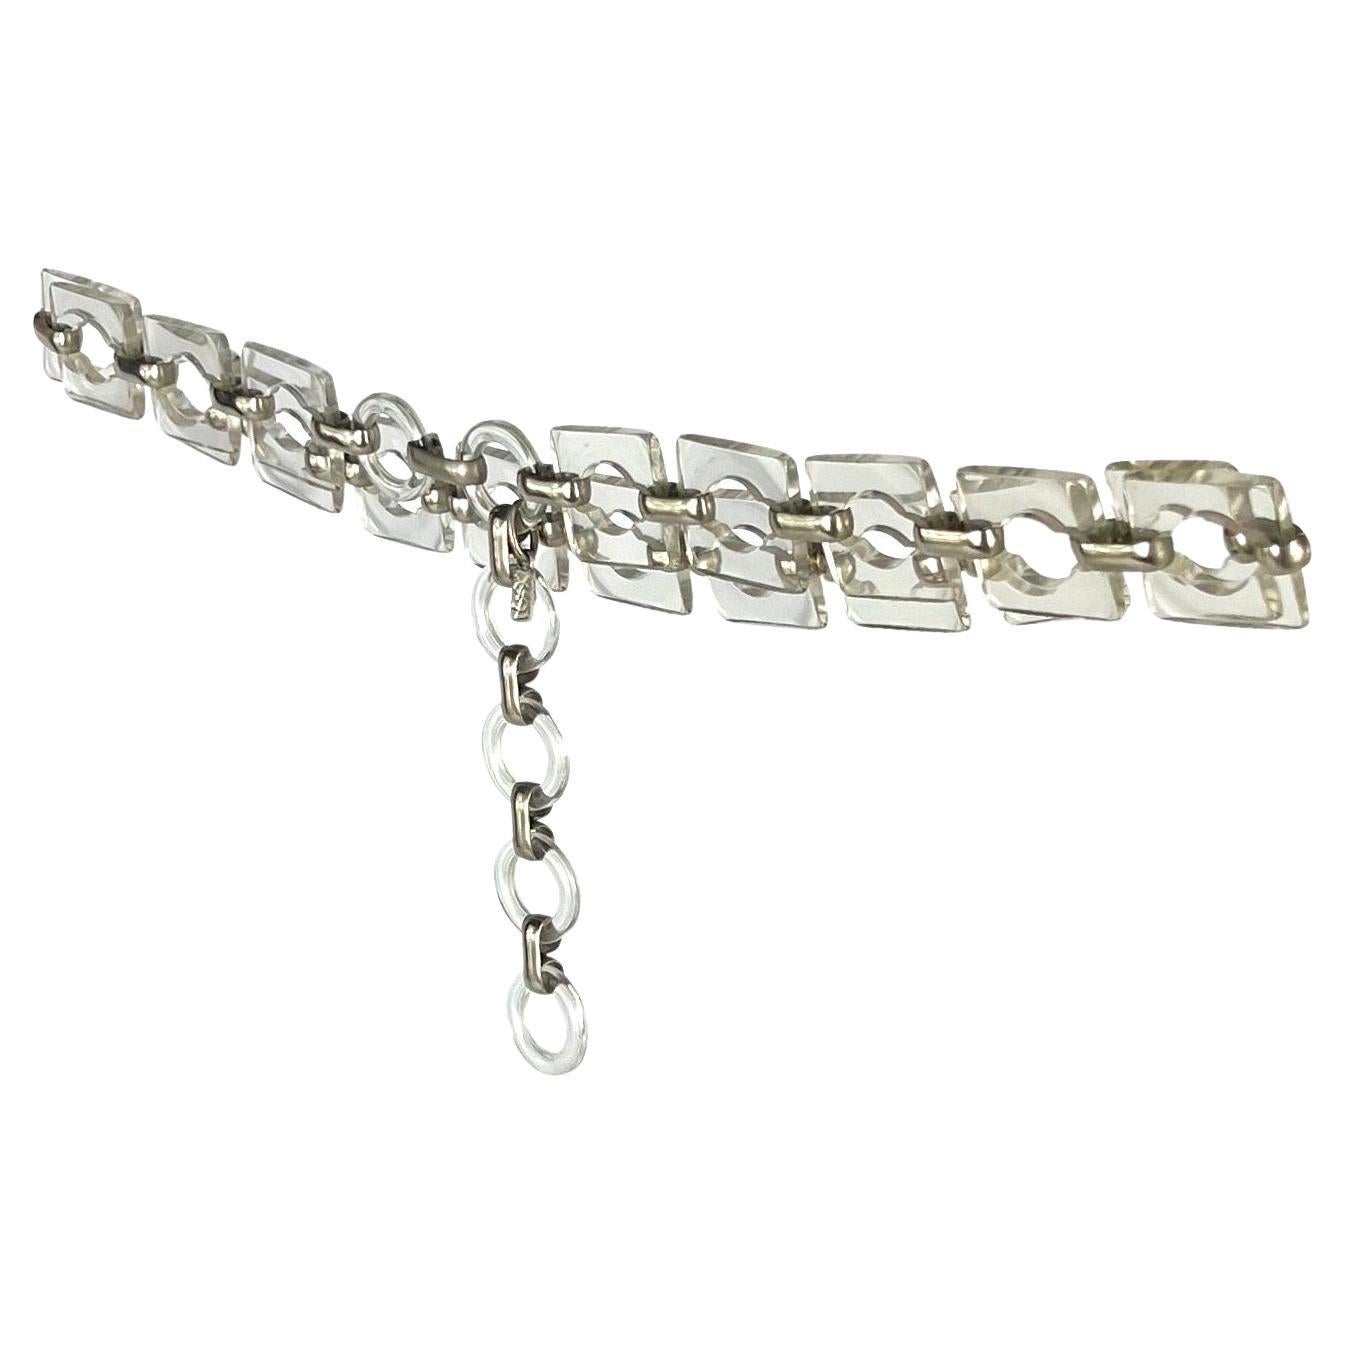 TheRealList presents: a clear acrylic and silver-tone metal Yves Saint Laurent belt, designed by Yves Saint Laurent. From the 1970s, this stunning belt features alternating acrylic round and square pieces connected by silver metal accents. This